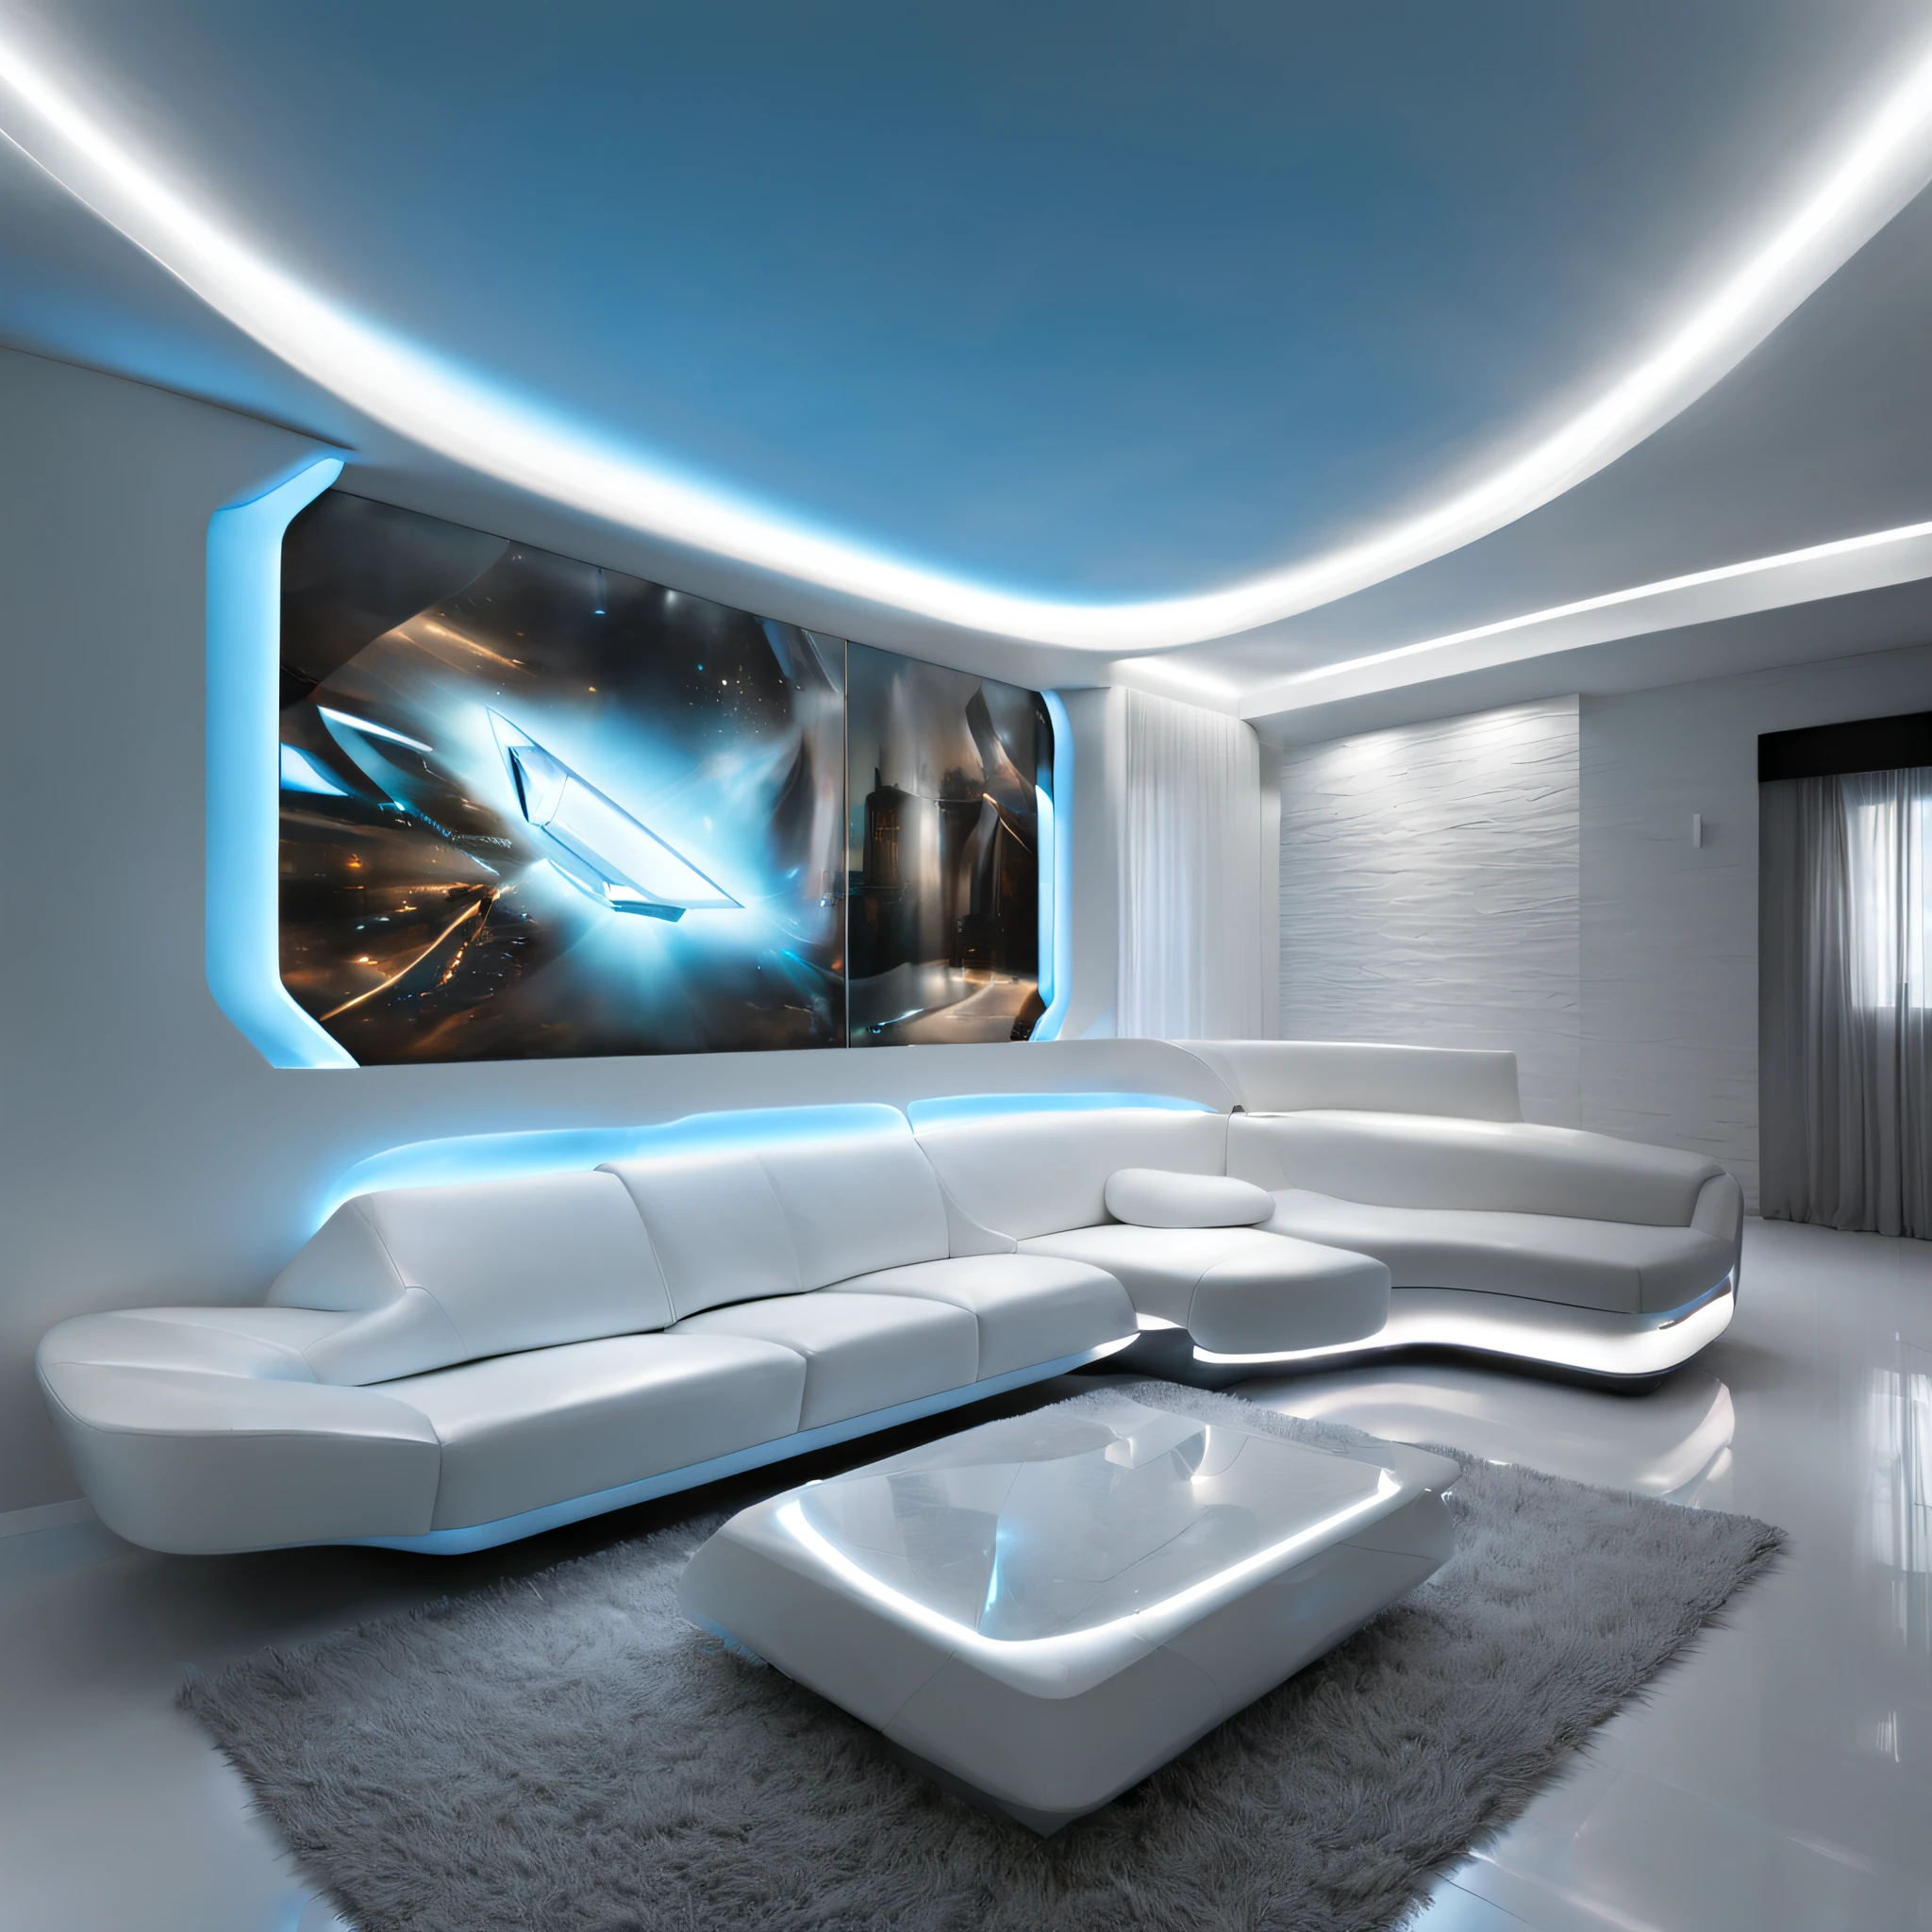 arafed ceiling with a glass panel and a white couch, futuristic dramatic lighting, futuristic looking living room, futuristic interior, futuristic room, futuristic decor, volumetric interior lighting, dramatic white and blue lighting, stunning volumetric lighting, glowing interior lighting, futuristic decoration, dramatic and dynamic lighting, white accent lighting, dramatic ambient lighting, award winning interior design, futuristic lighting